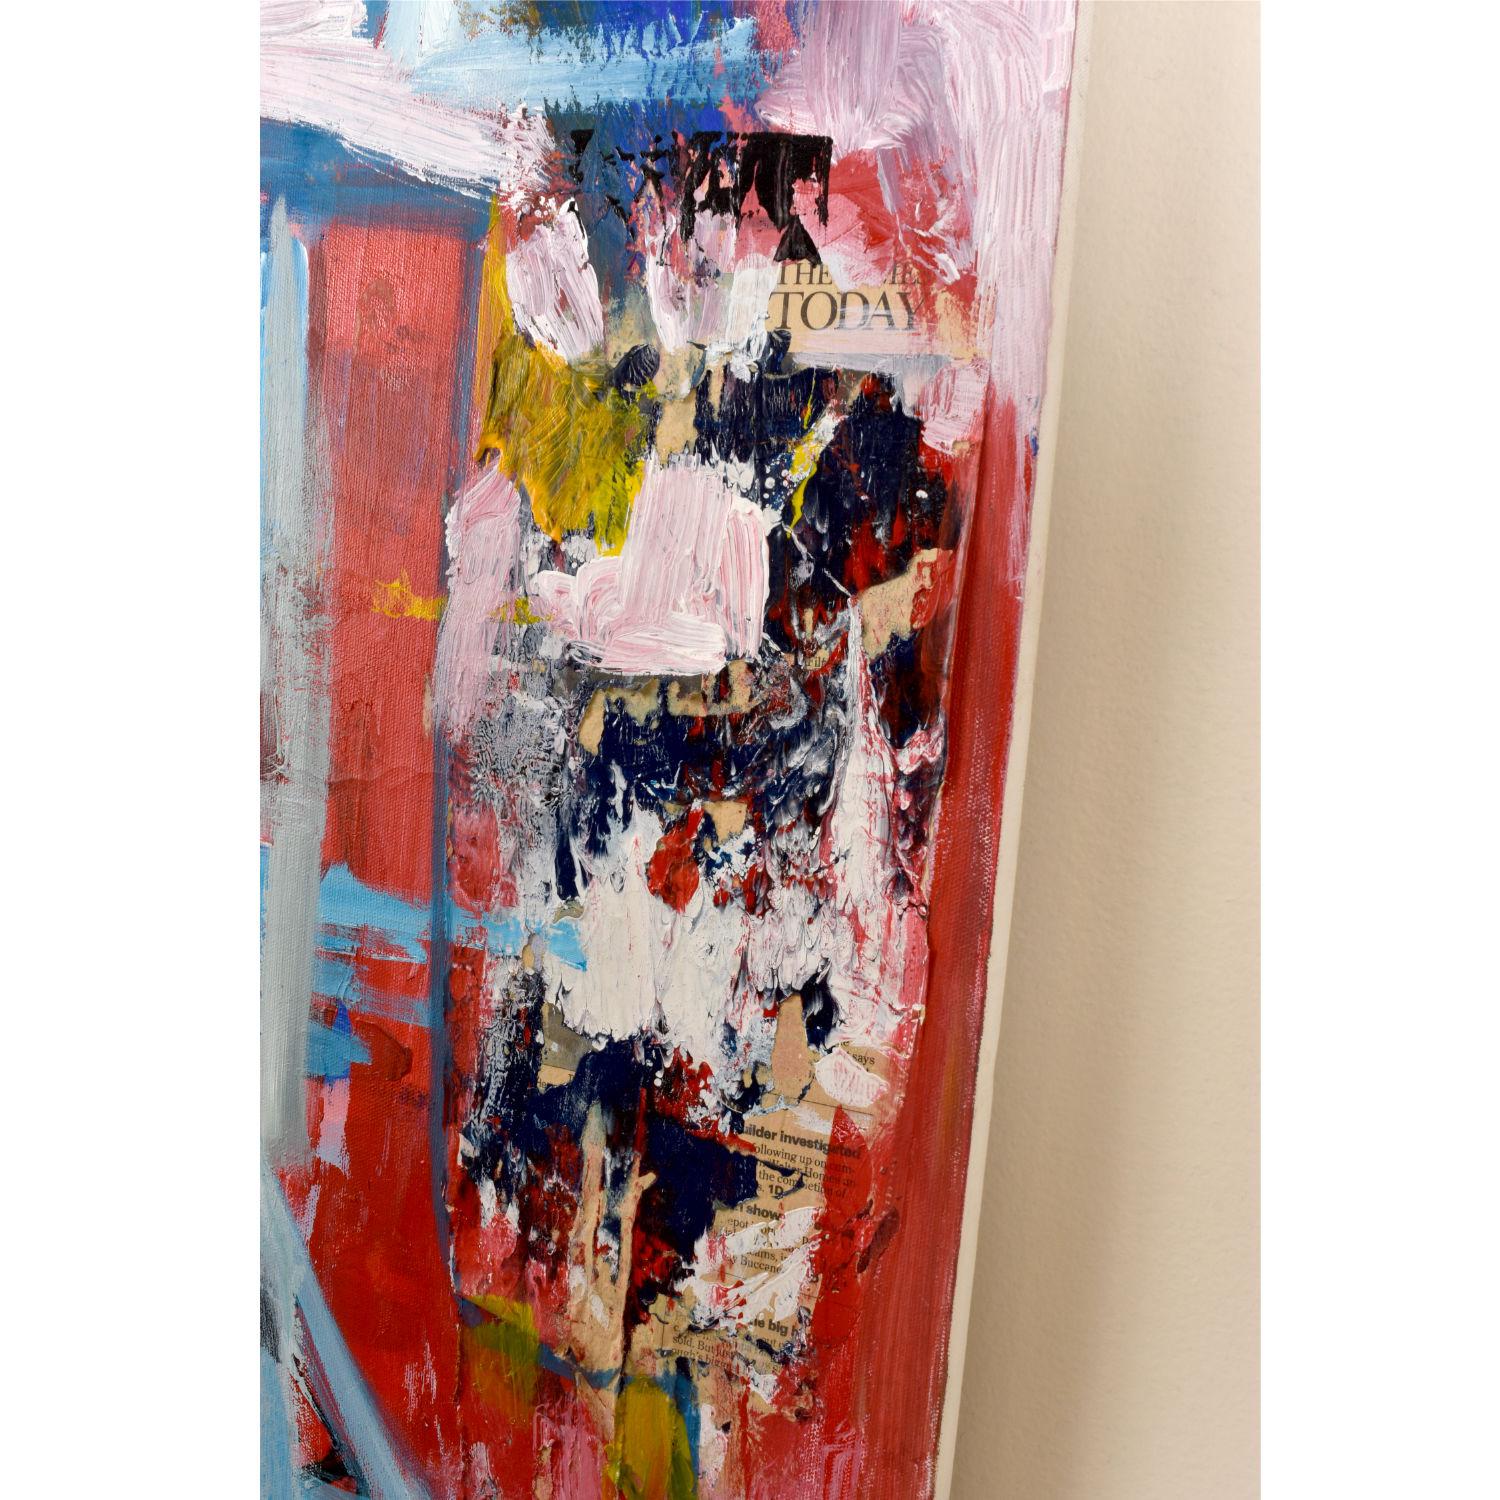 Wood D Puertas Abstract Expressionist Painting in Red Blue and Yellow